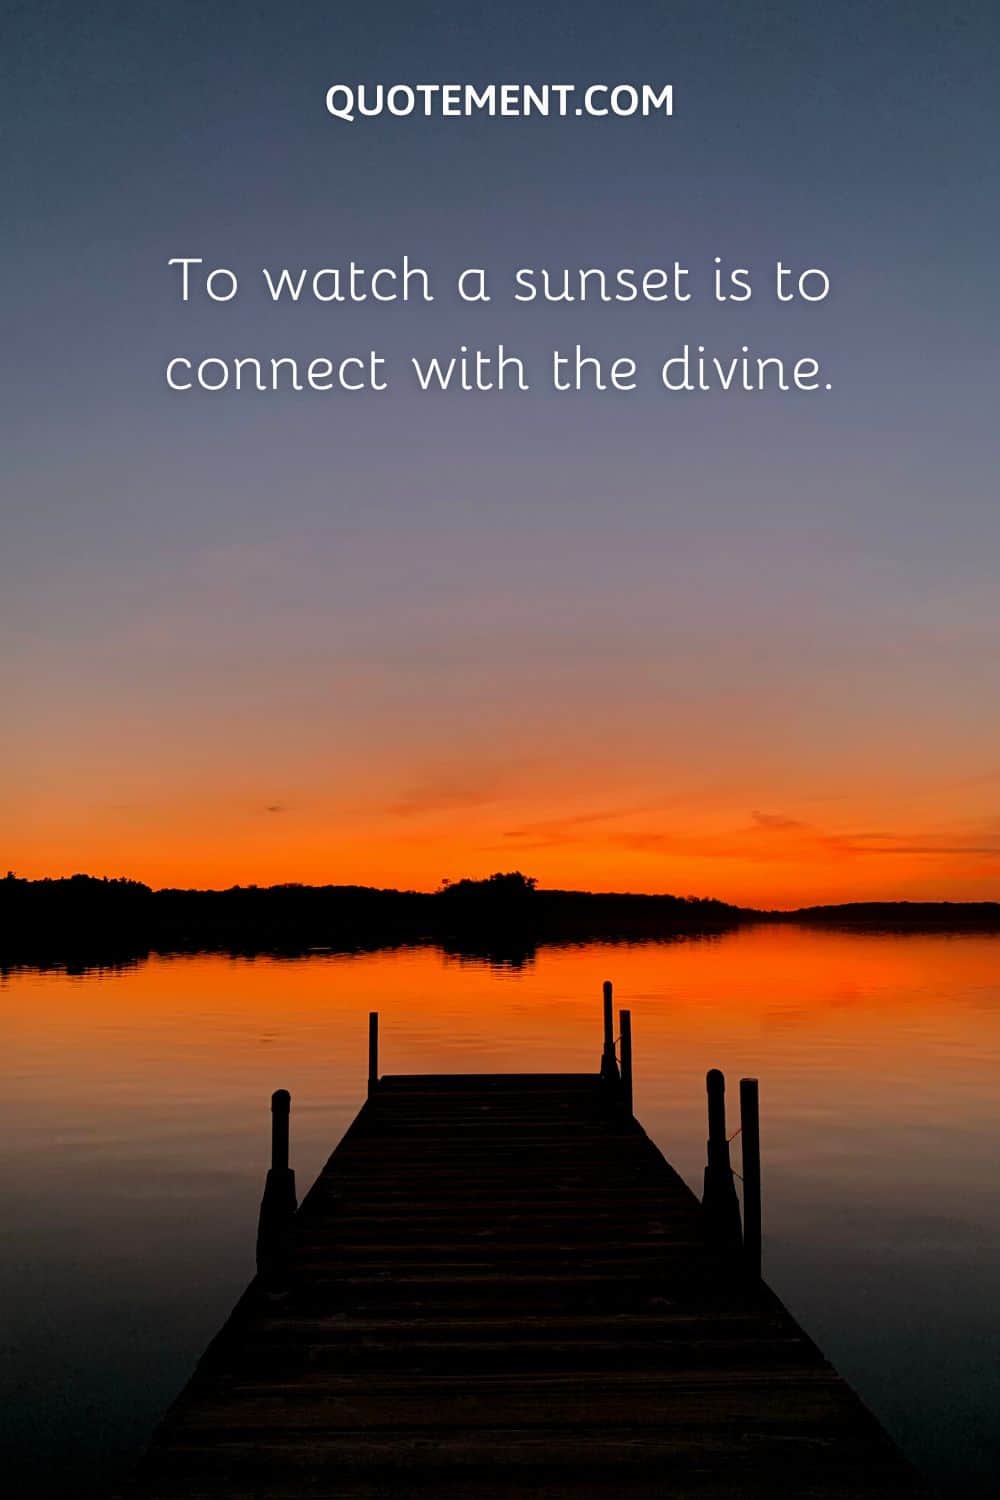 To watch a sunset is to connect with the divine.